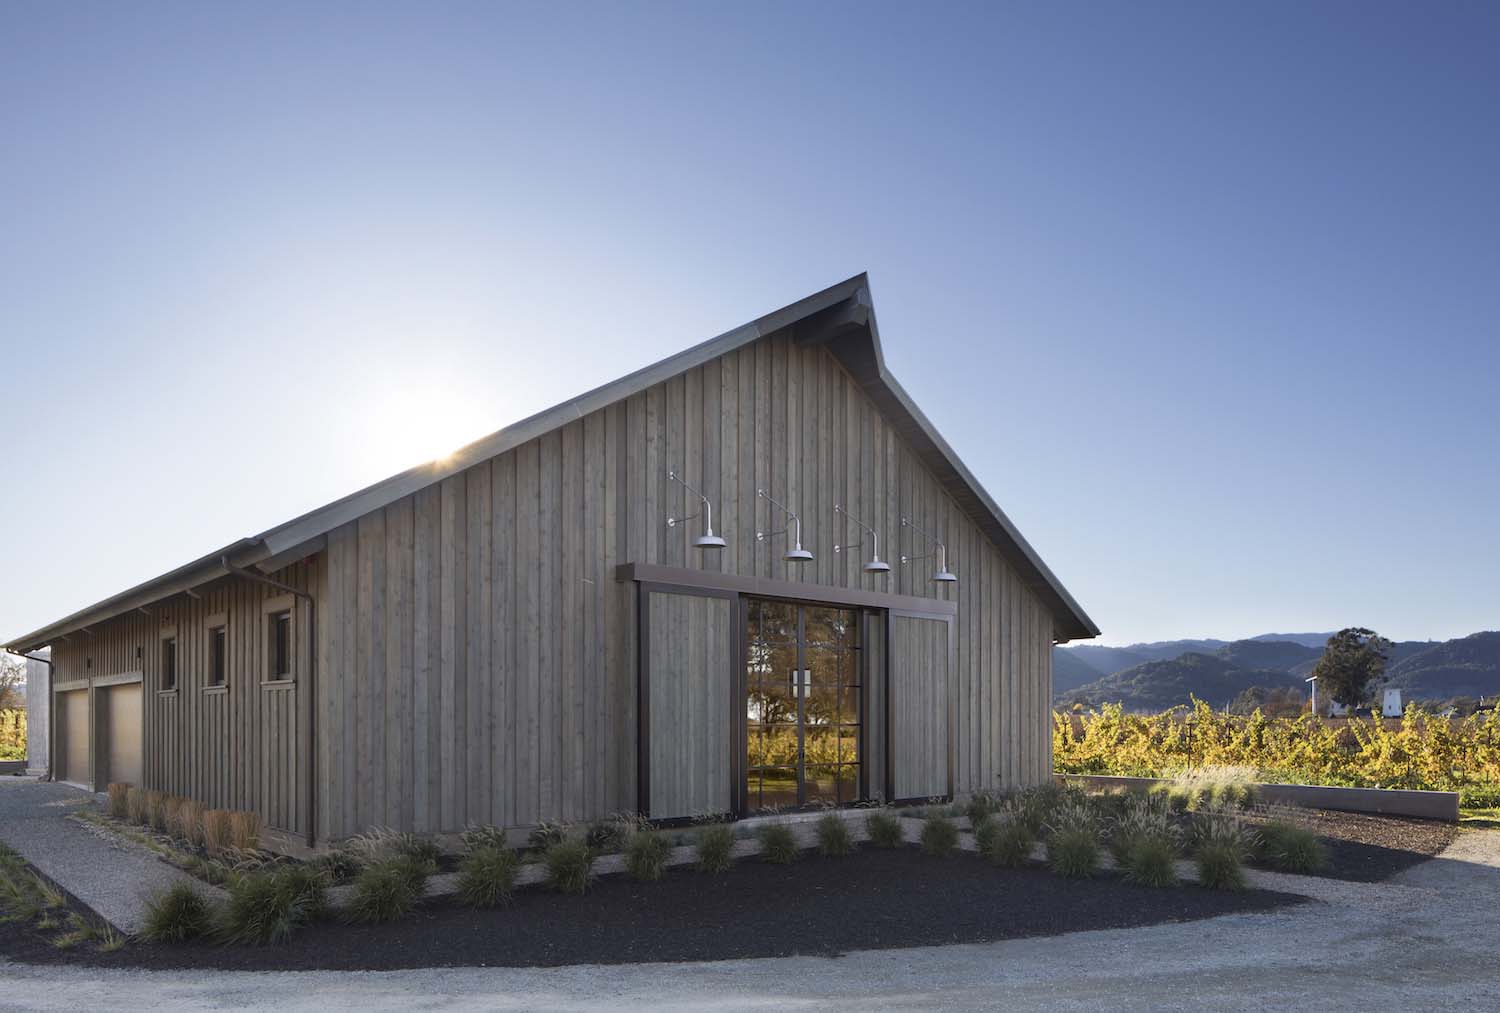 barn style garage surrounded by vineyards